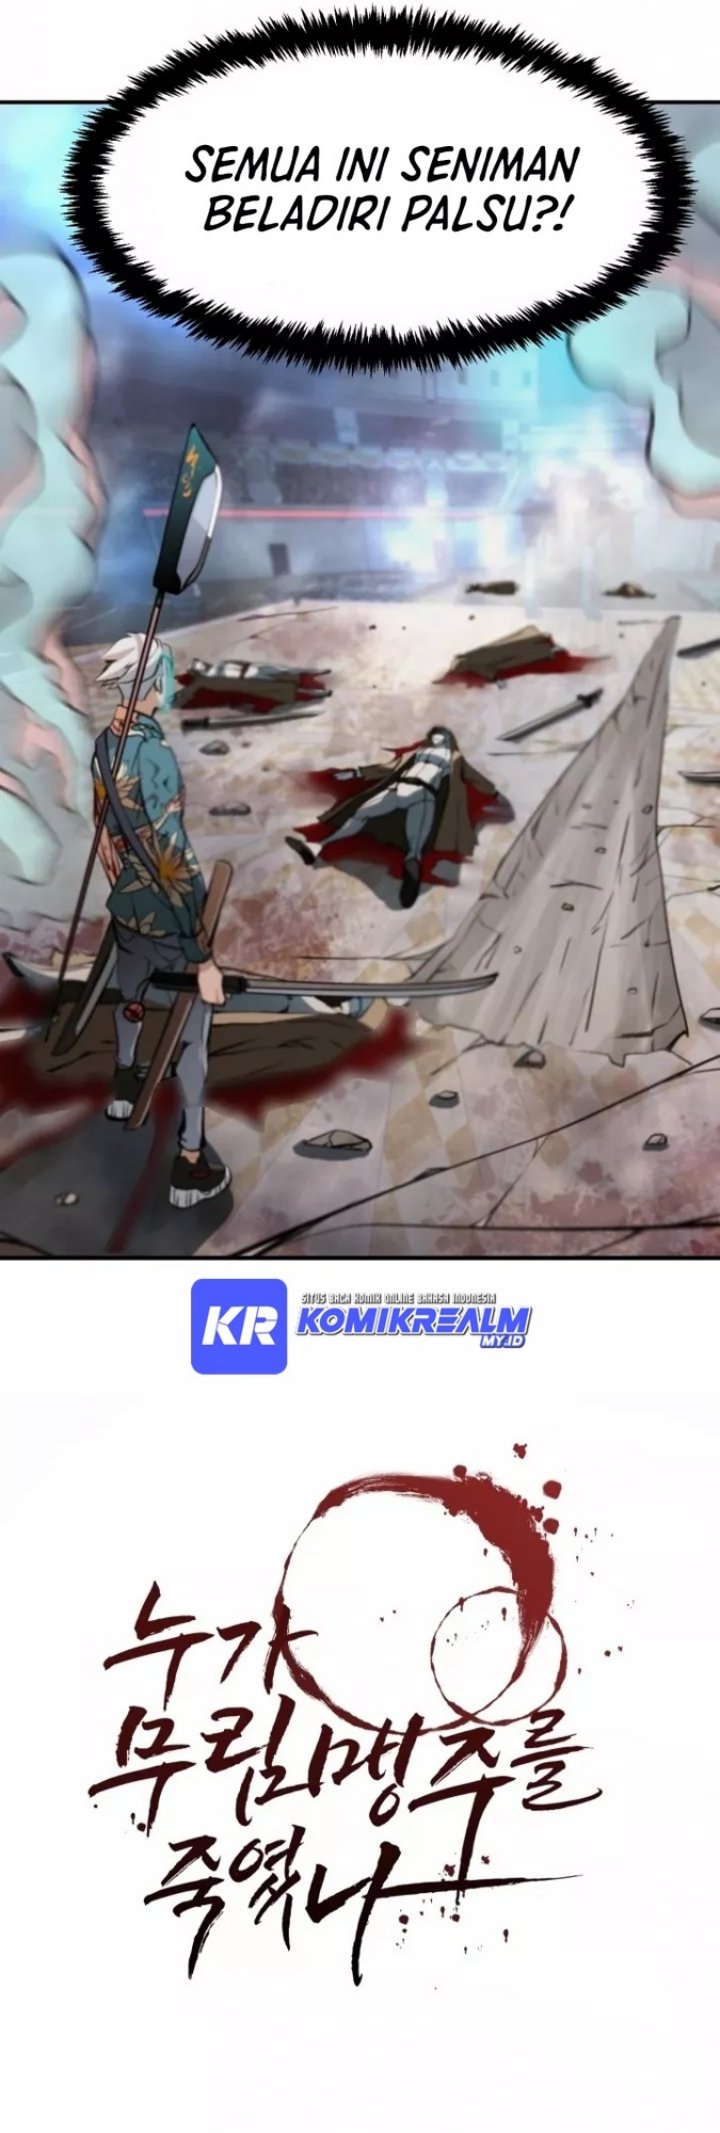 Who Killed the Murim Lord? Chapter 40